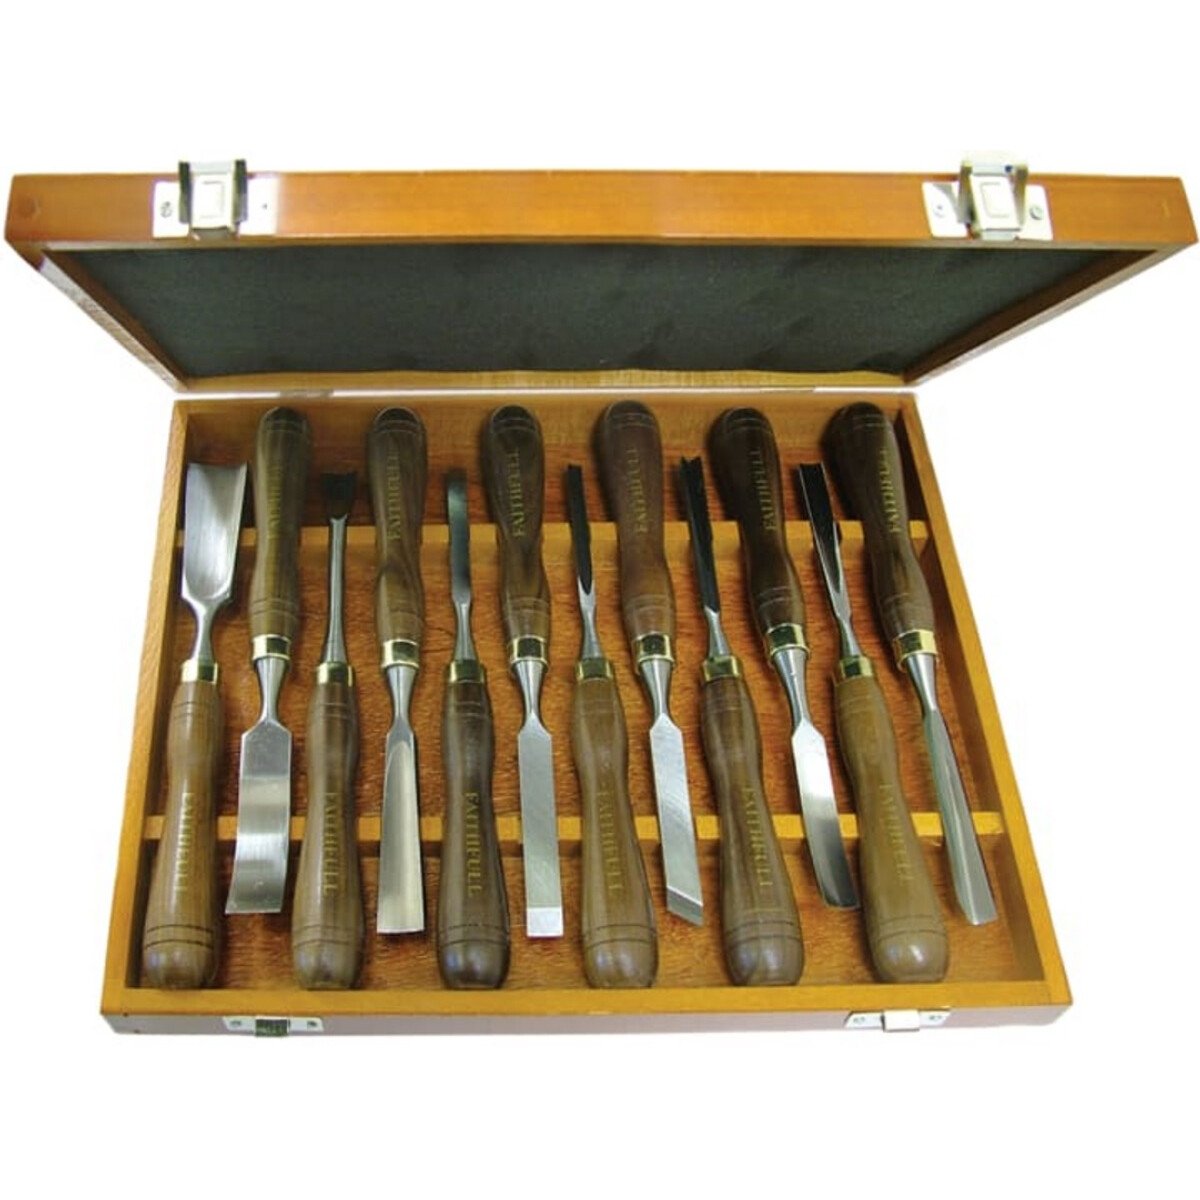 Faithfull FAIWCSET12 Woodcarving Set of 12 Chisels in Case